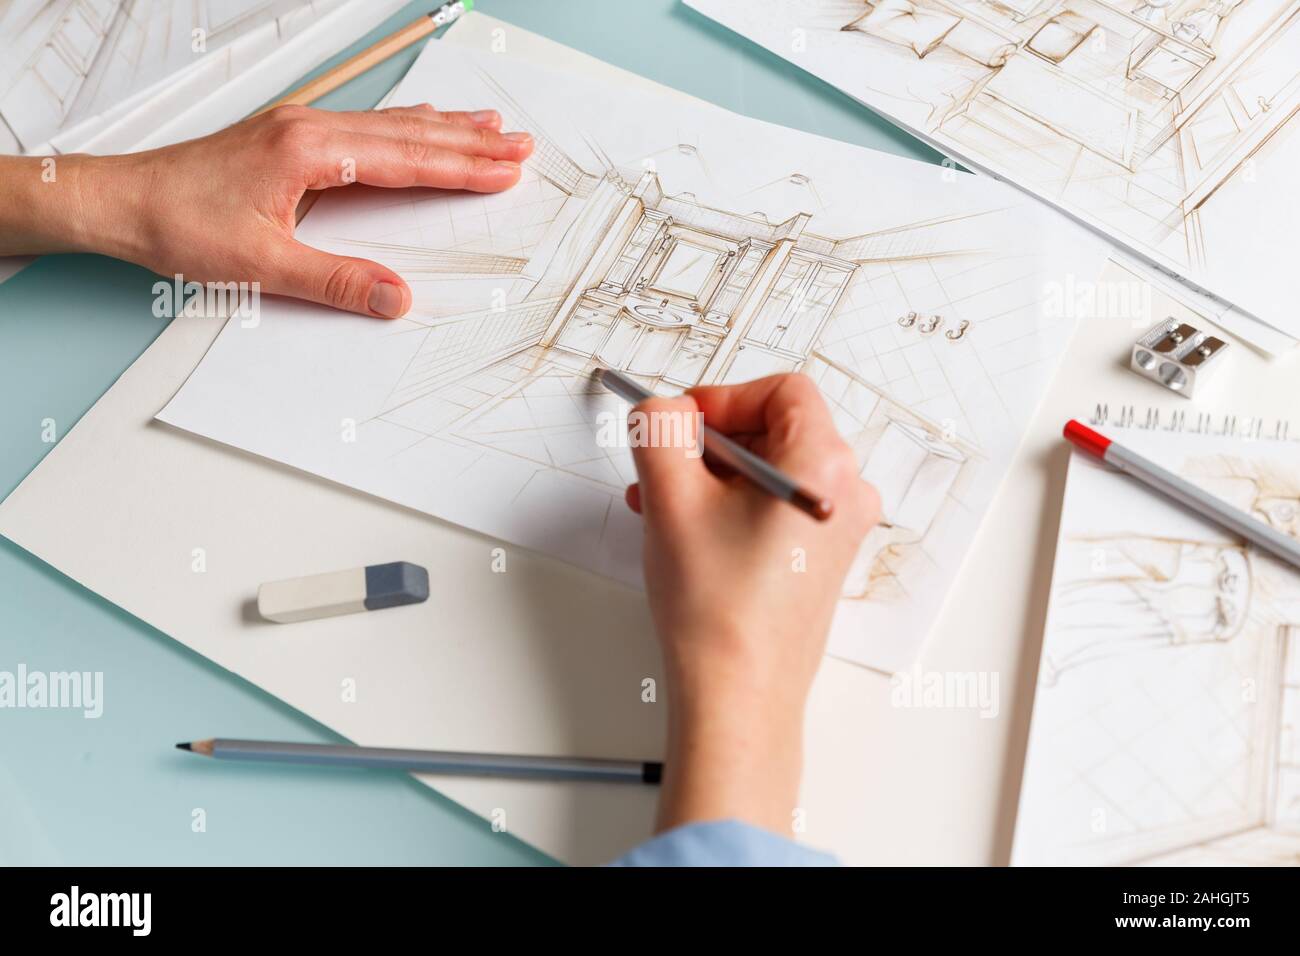 Interior Designer Making Hand Drawing Pencil Sketch Of A